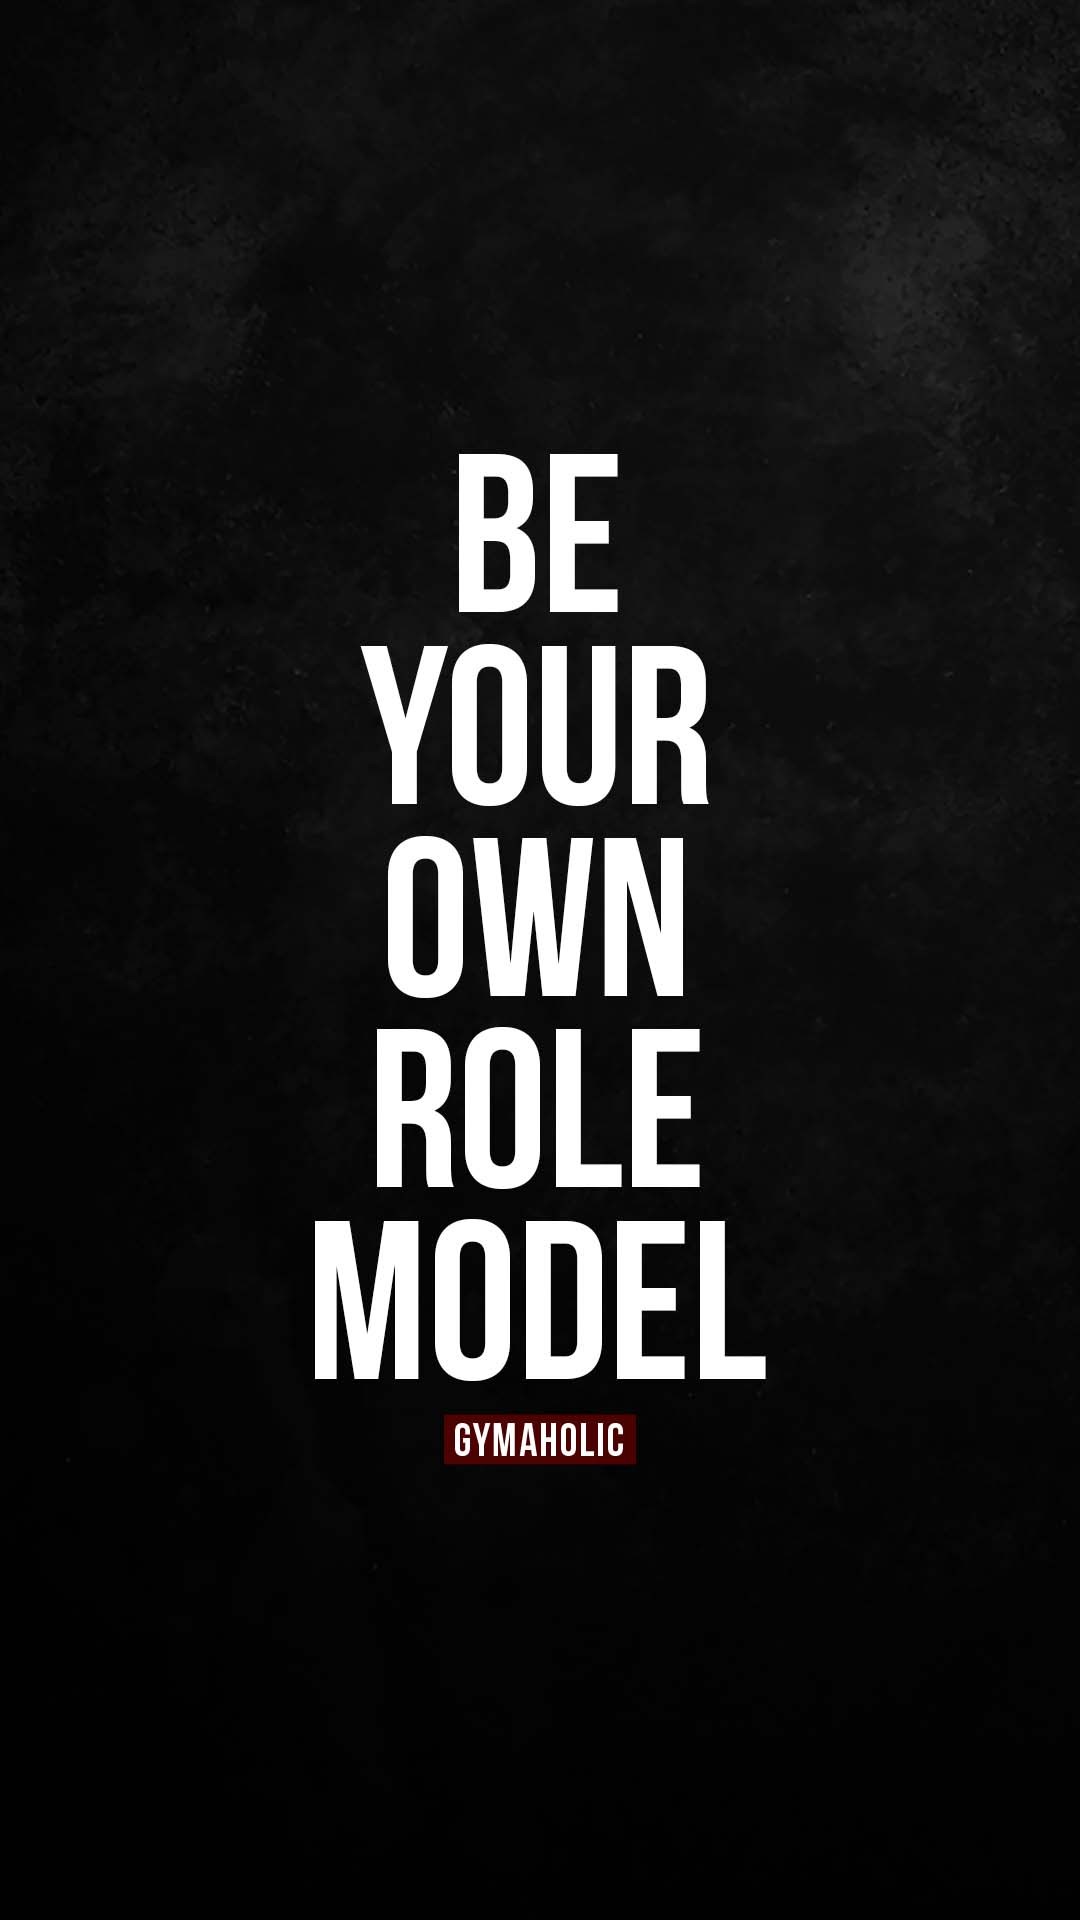 Be your own role model #gymaholic